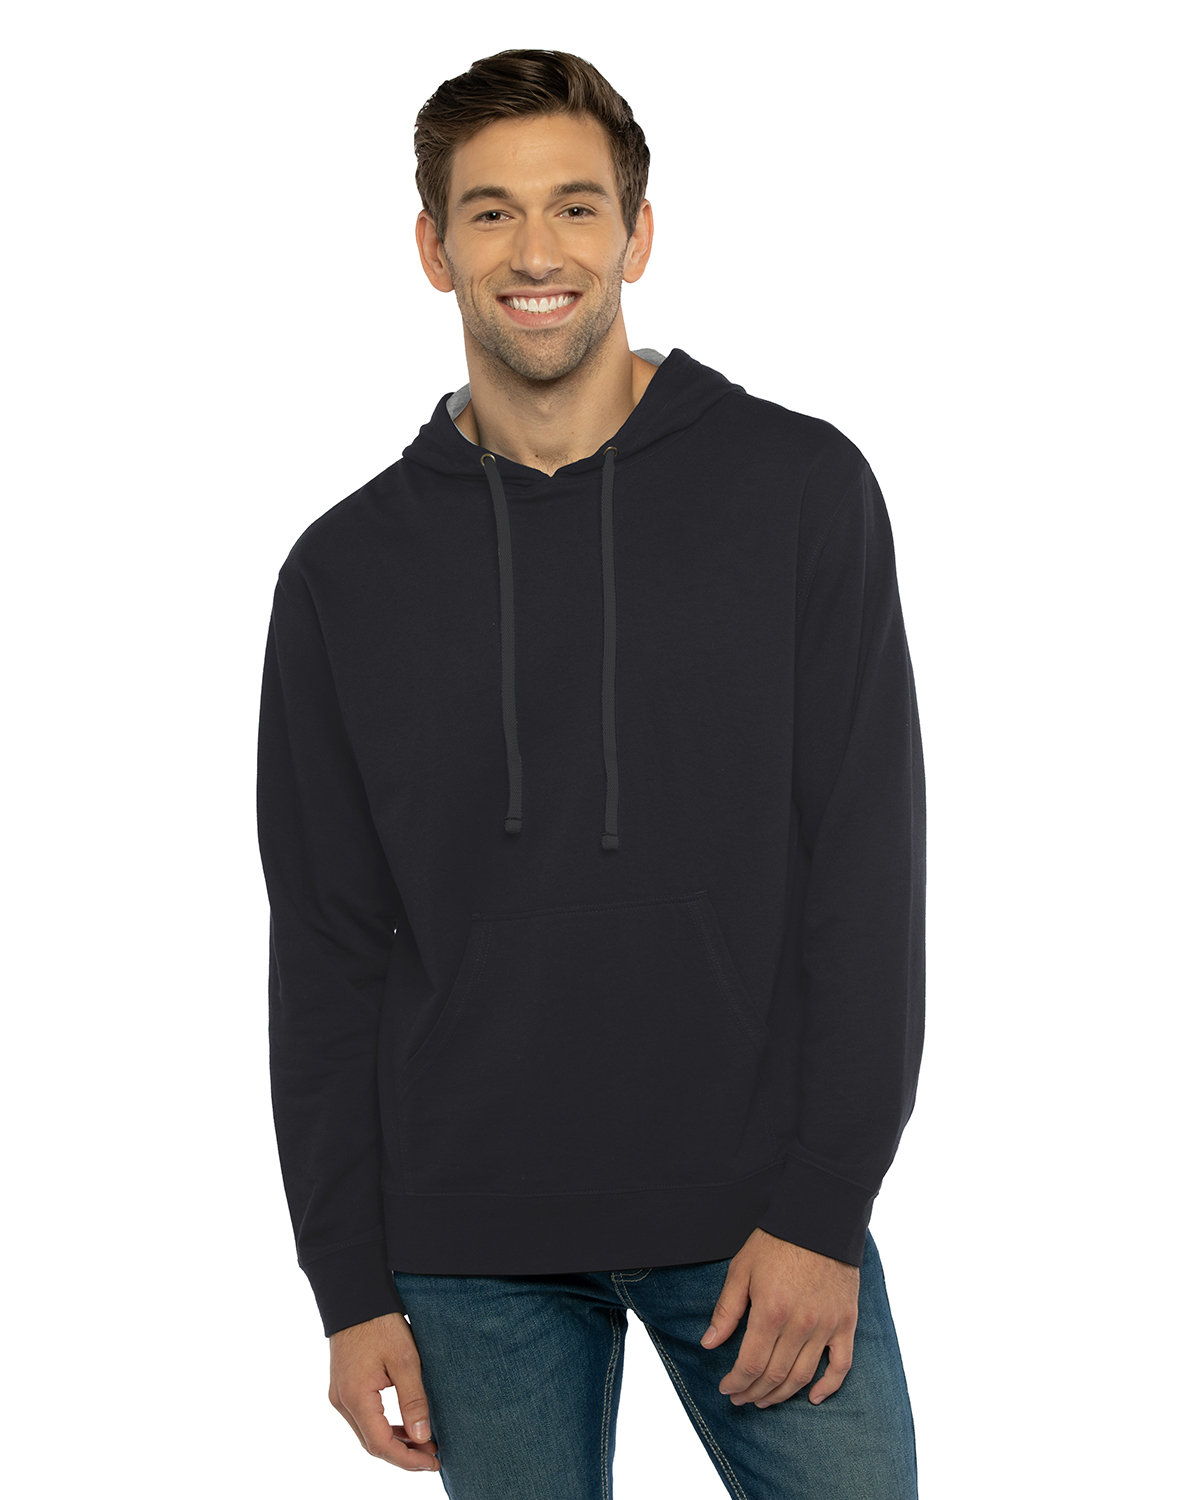 Next Level Apparel Unisex French Terry Pullover Hoodie BLACK/ HTHR GREY 